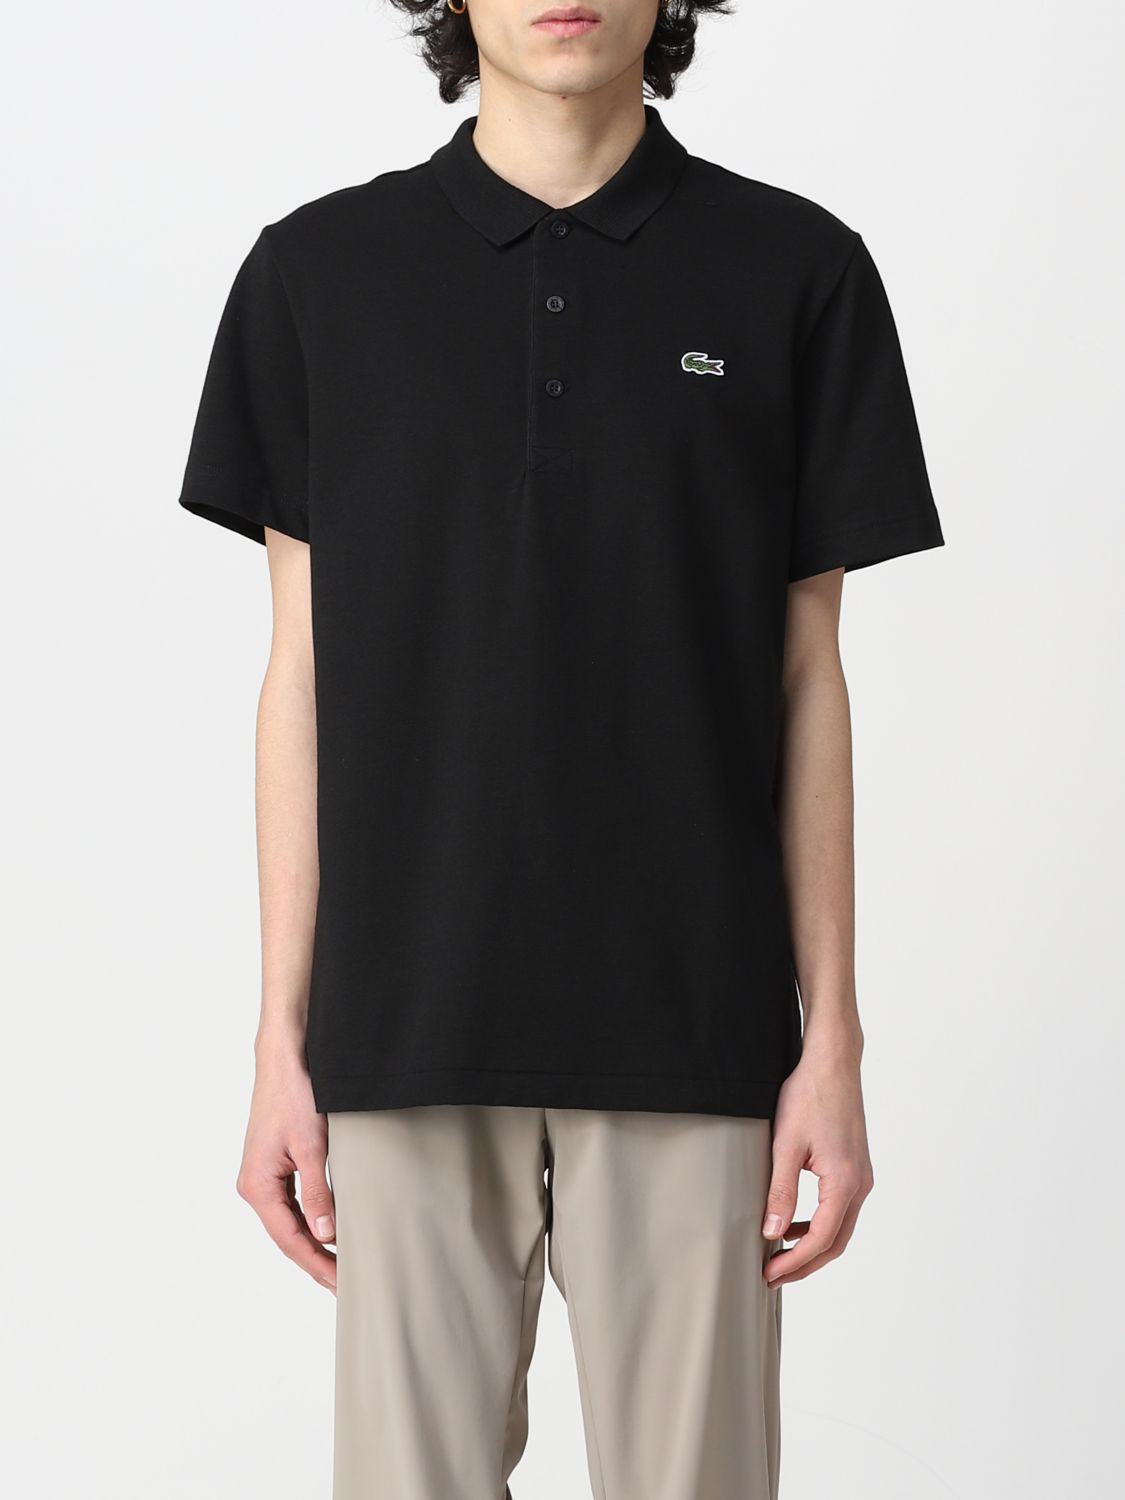 LACOSTE: basic logo polo shirt - Black | Lacoste polo shirt DH2881 at GIGLIO.COM